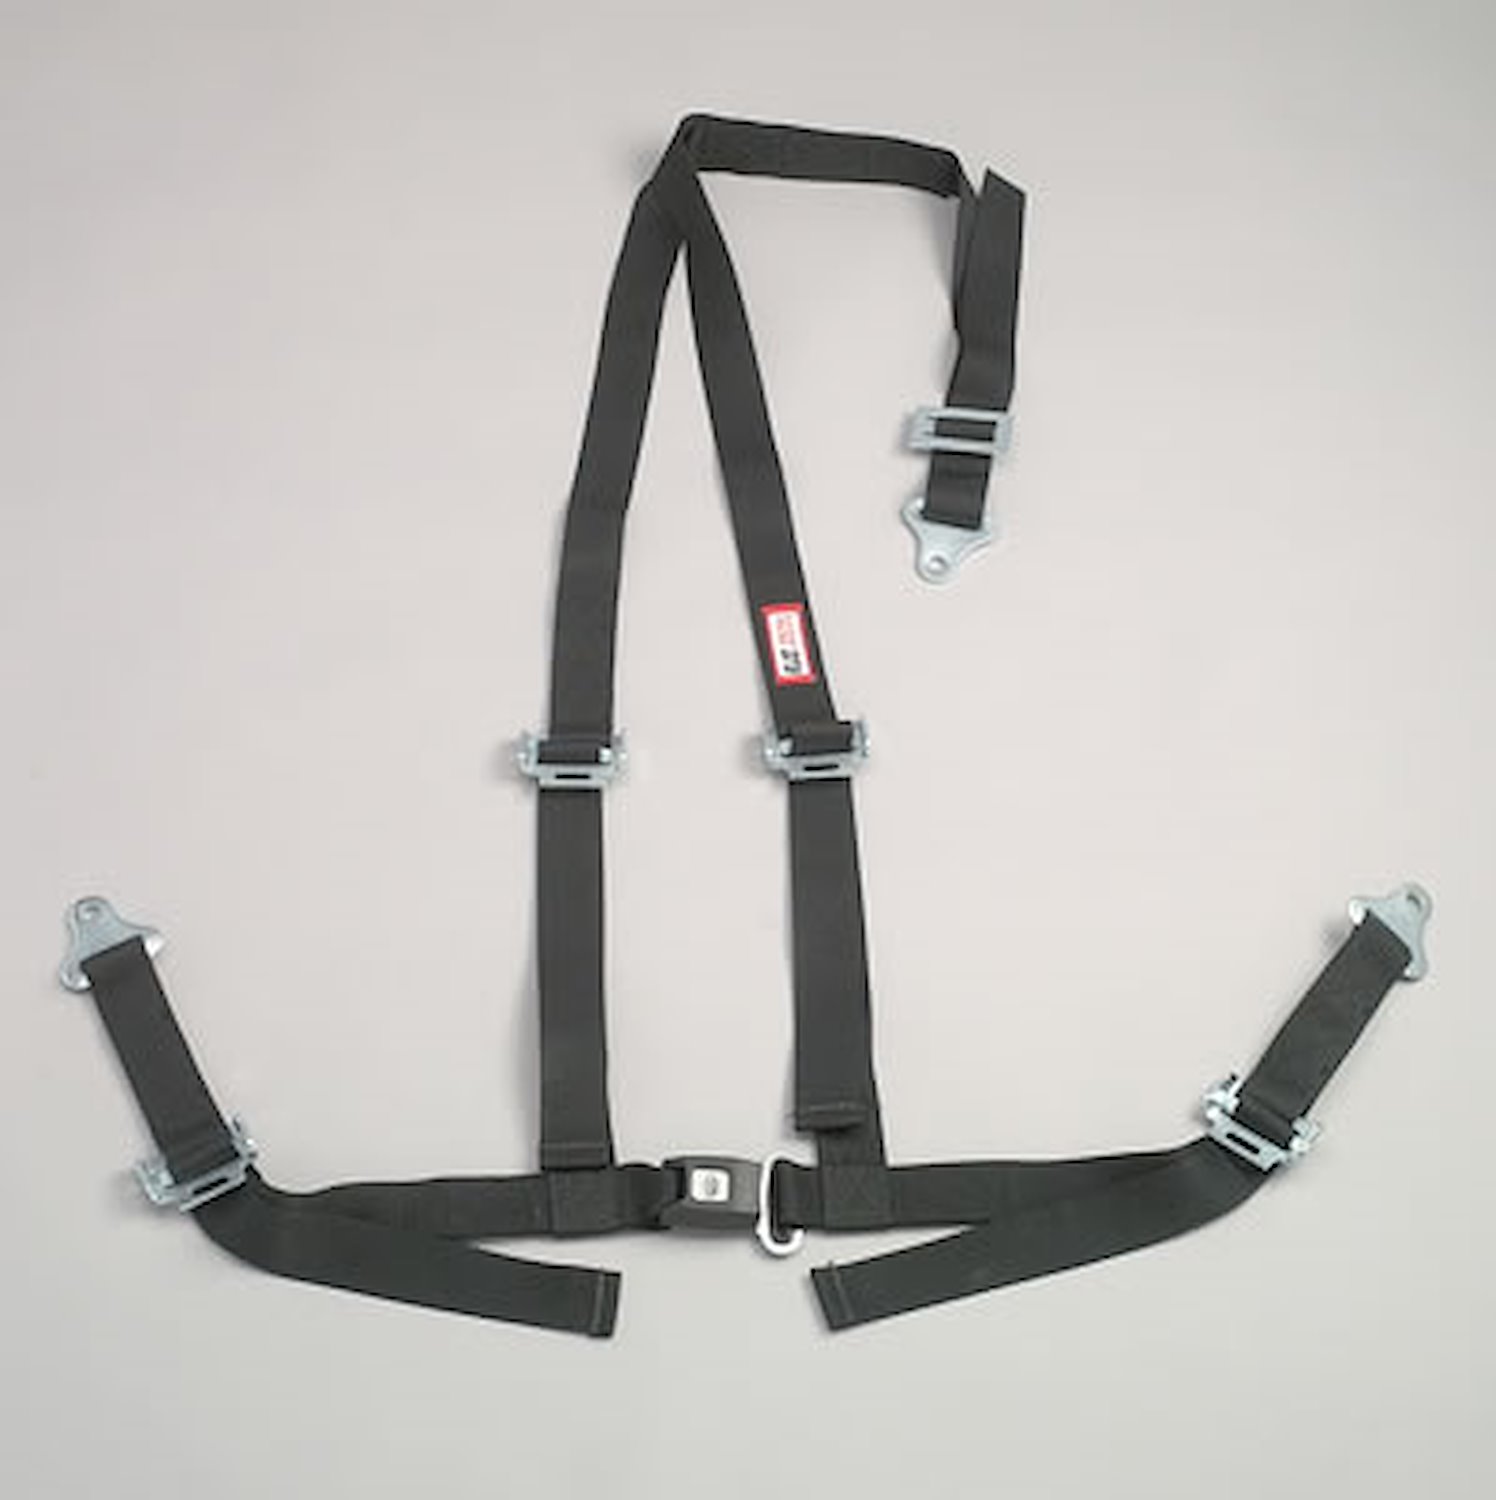 NON-SFI B&T HARNESS 2 PULL UP Lap Belt 2 S. H. V ROLL BAR Mount ALL BOLT ENDS w/STERNUM STRAP YELLOW